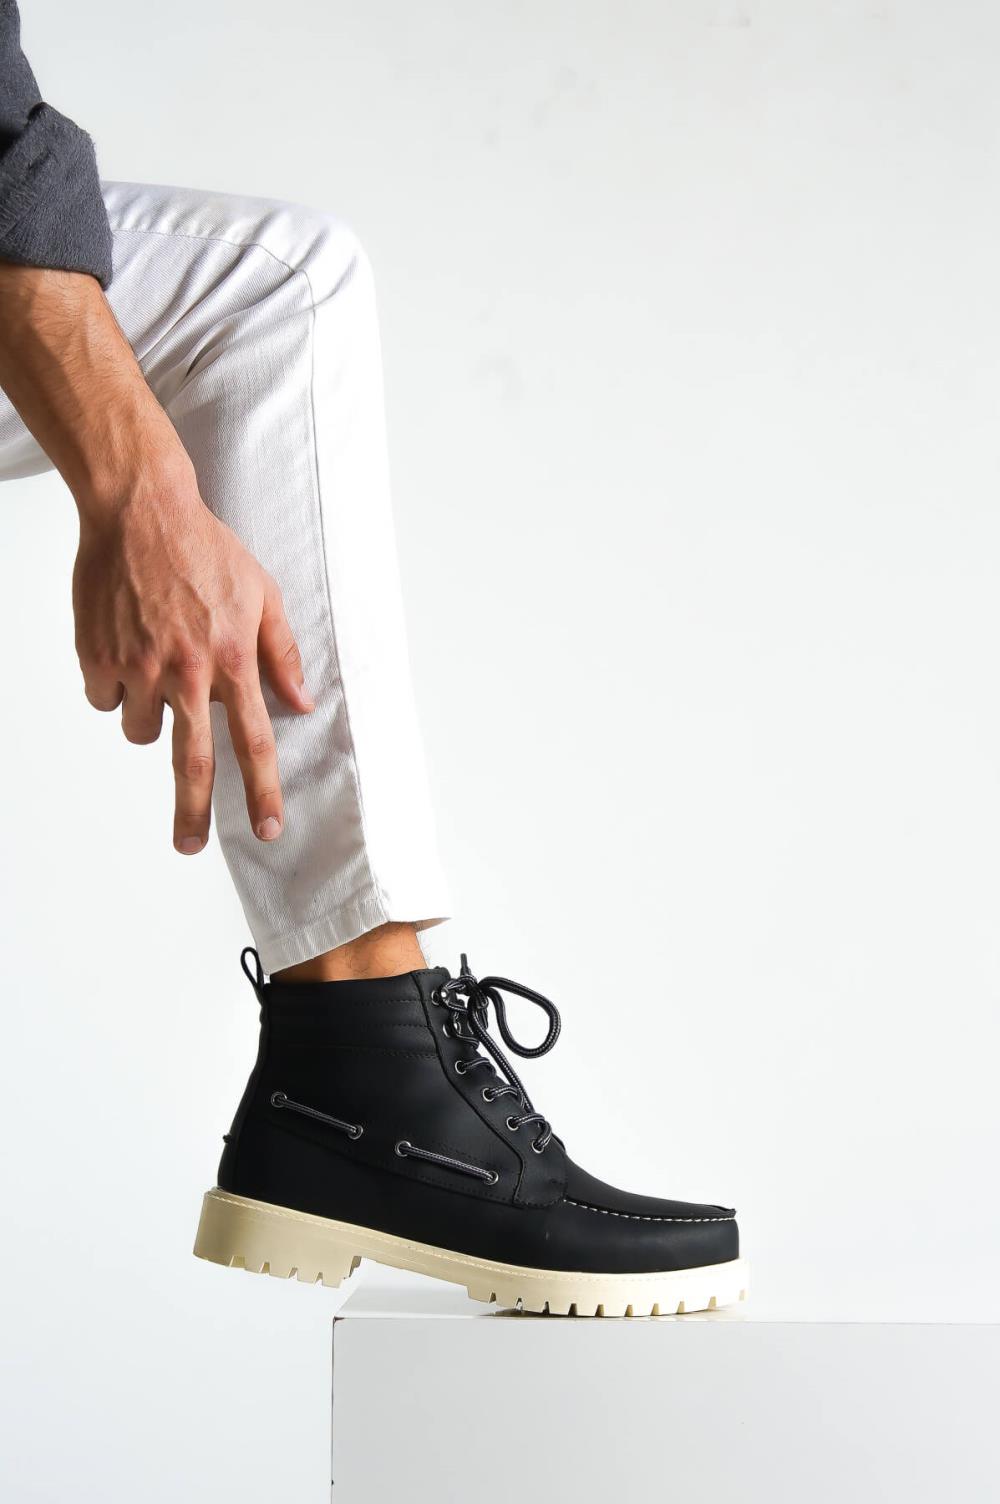 High Sole Shoes B-020 Black (White Sole) - STREETMODE ™